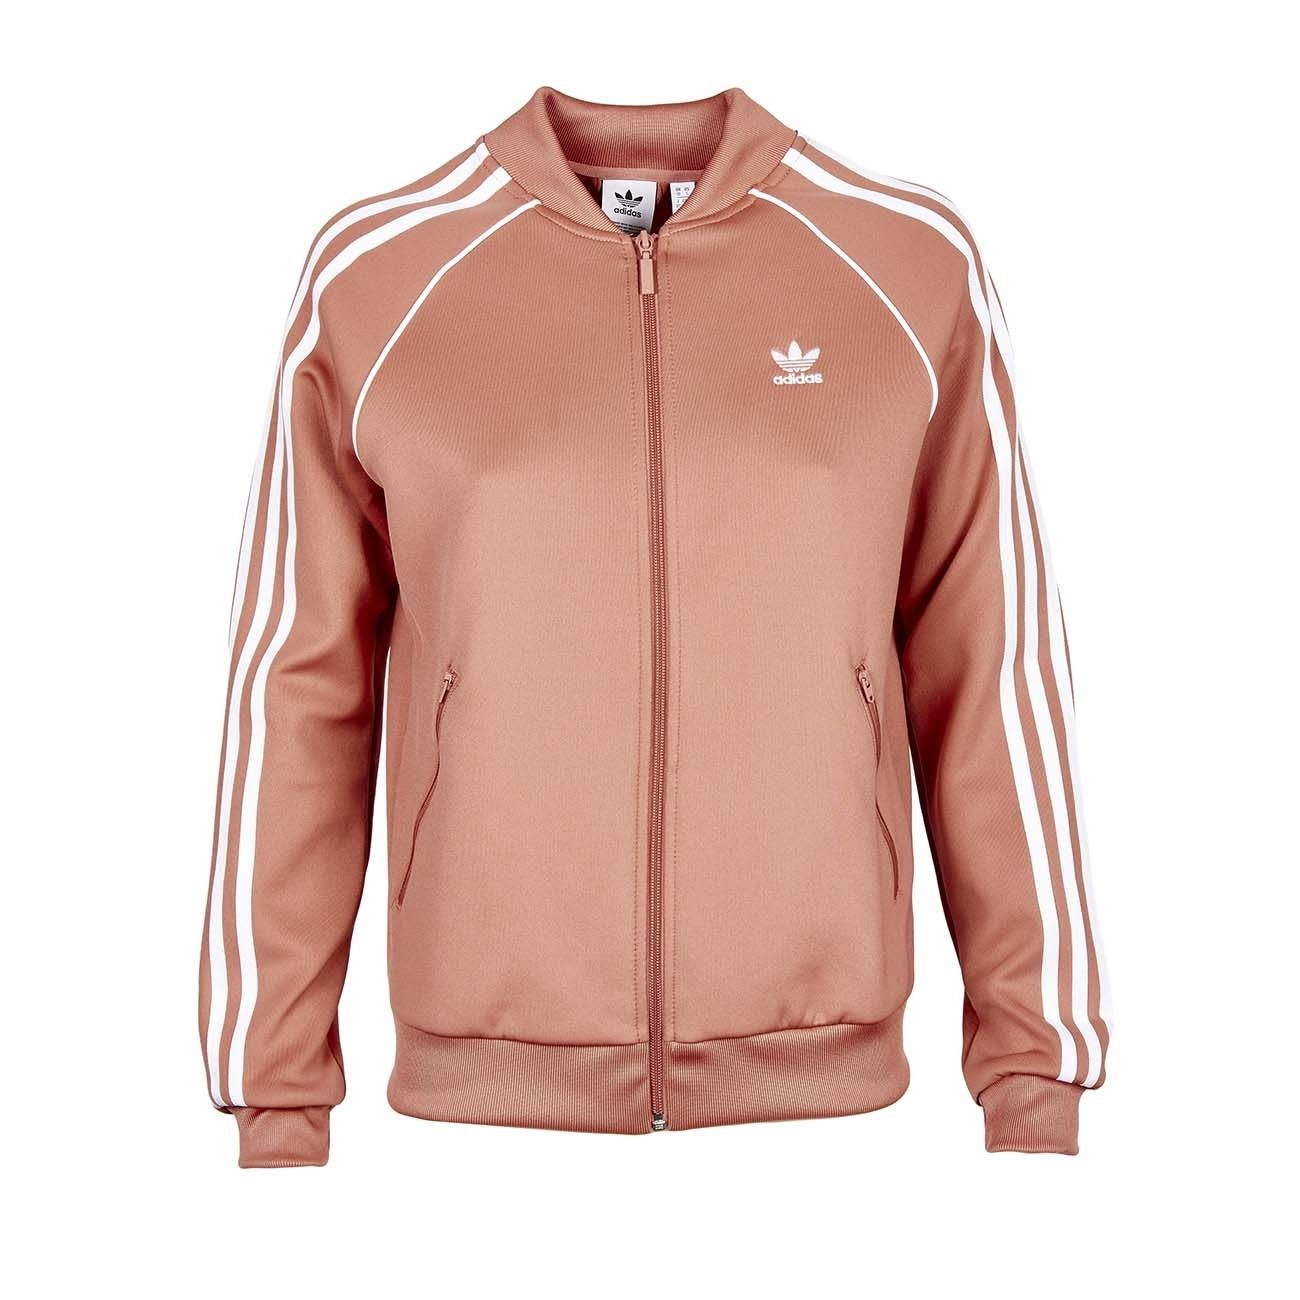 pink adidas jacket with white stripes